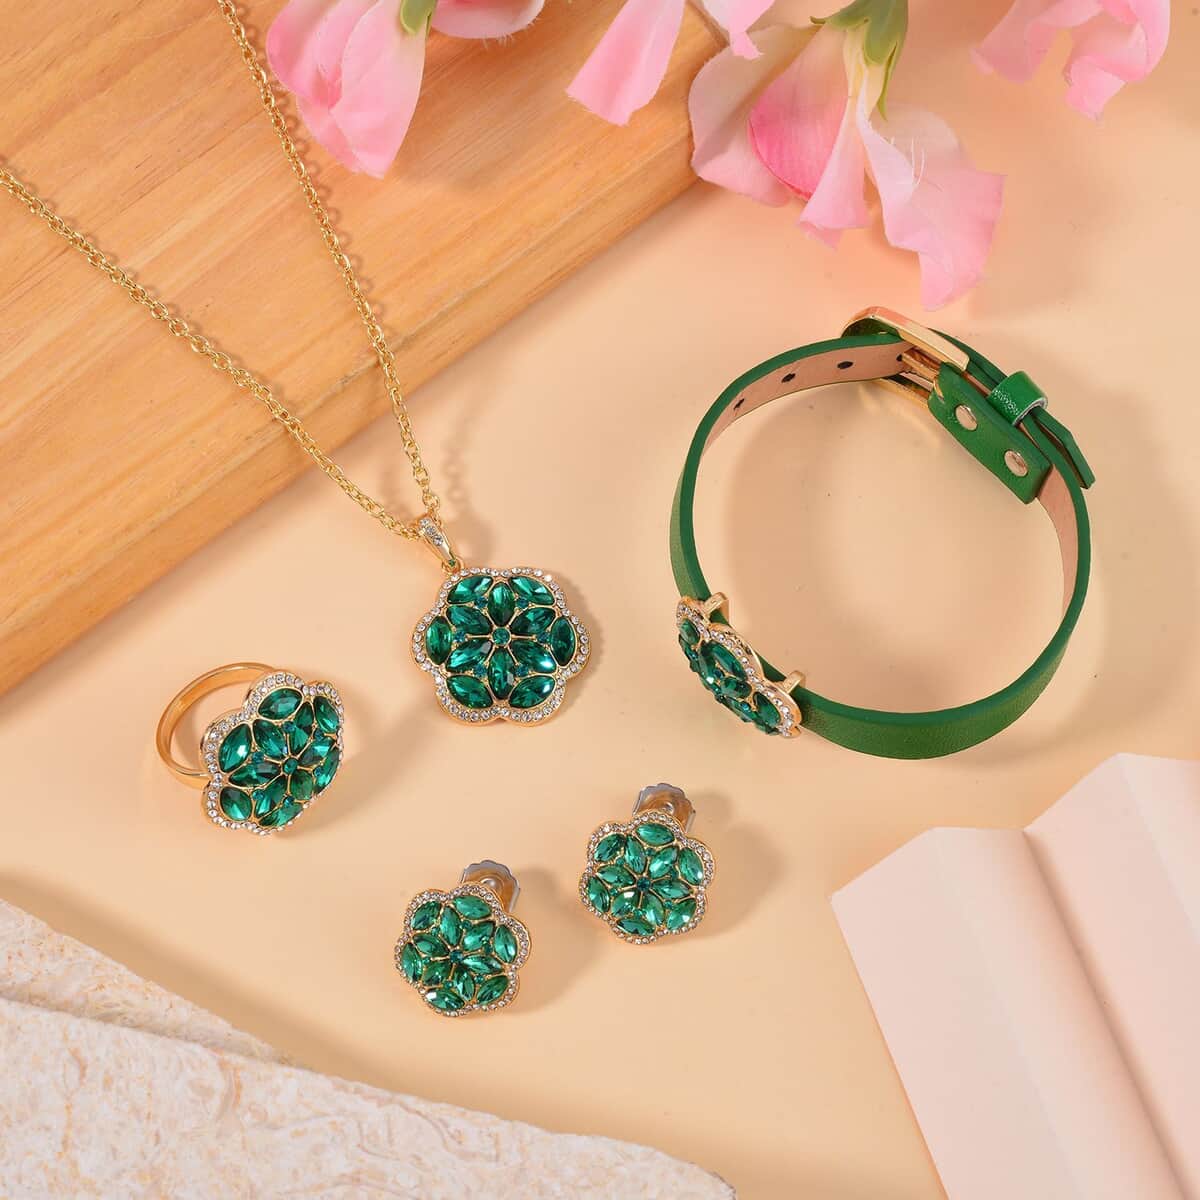 Green and White Austrian Crystal, Faux Leather Floral Bracelet (6-8In), Earrings, Ring (Size 9.0) and Pendant Necklace 20-22 Inches In Goldtone image number 1